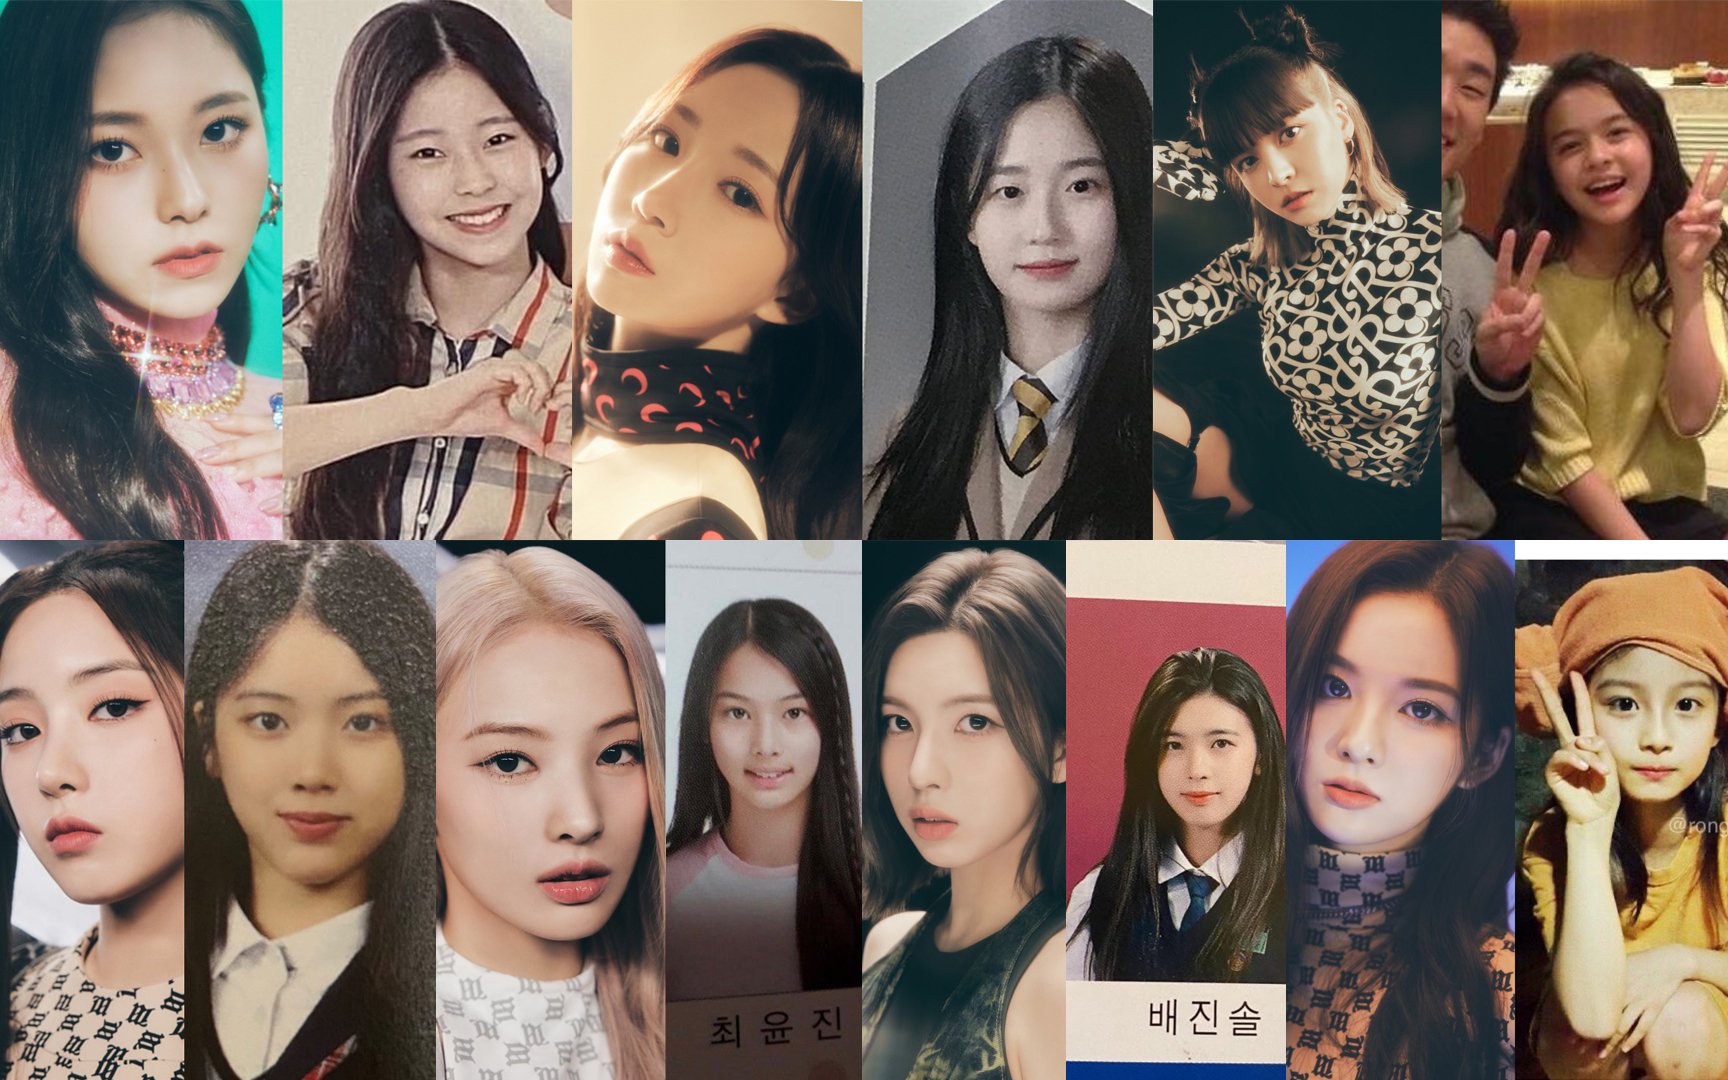 Check out the childhood photo of JYP Entertainment's new girl group NMIXX